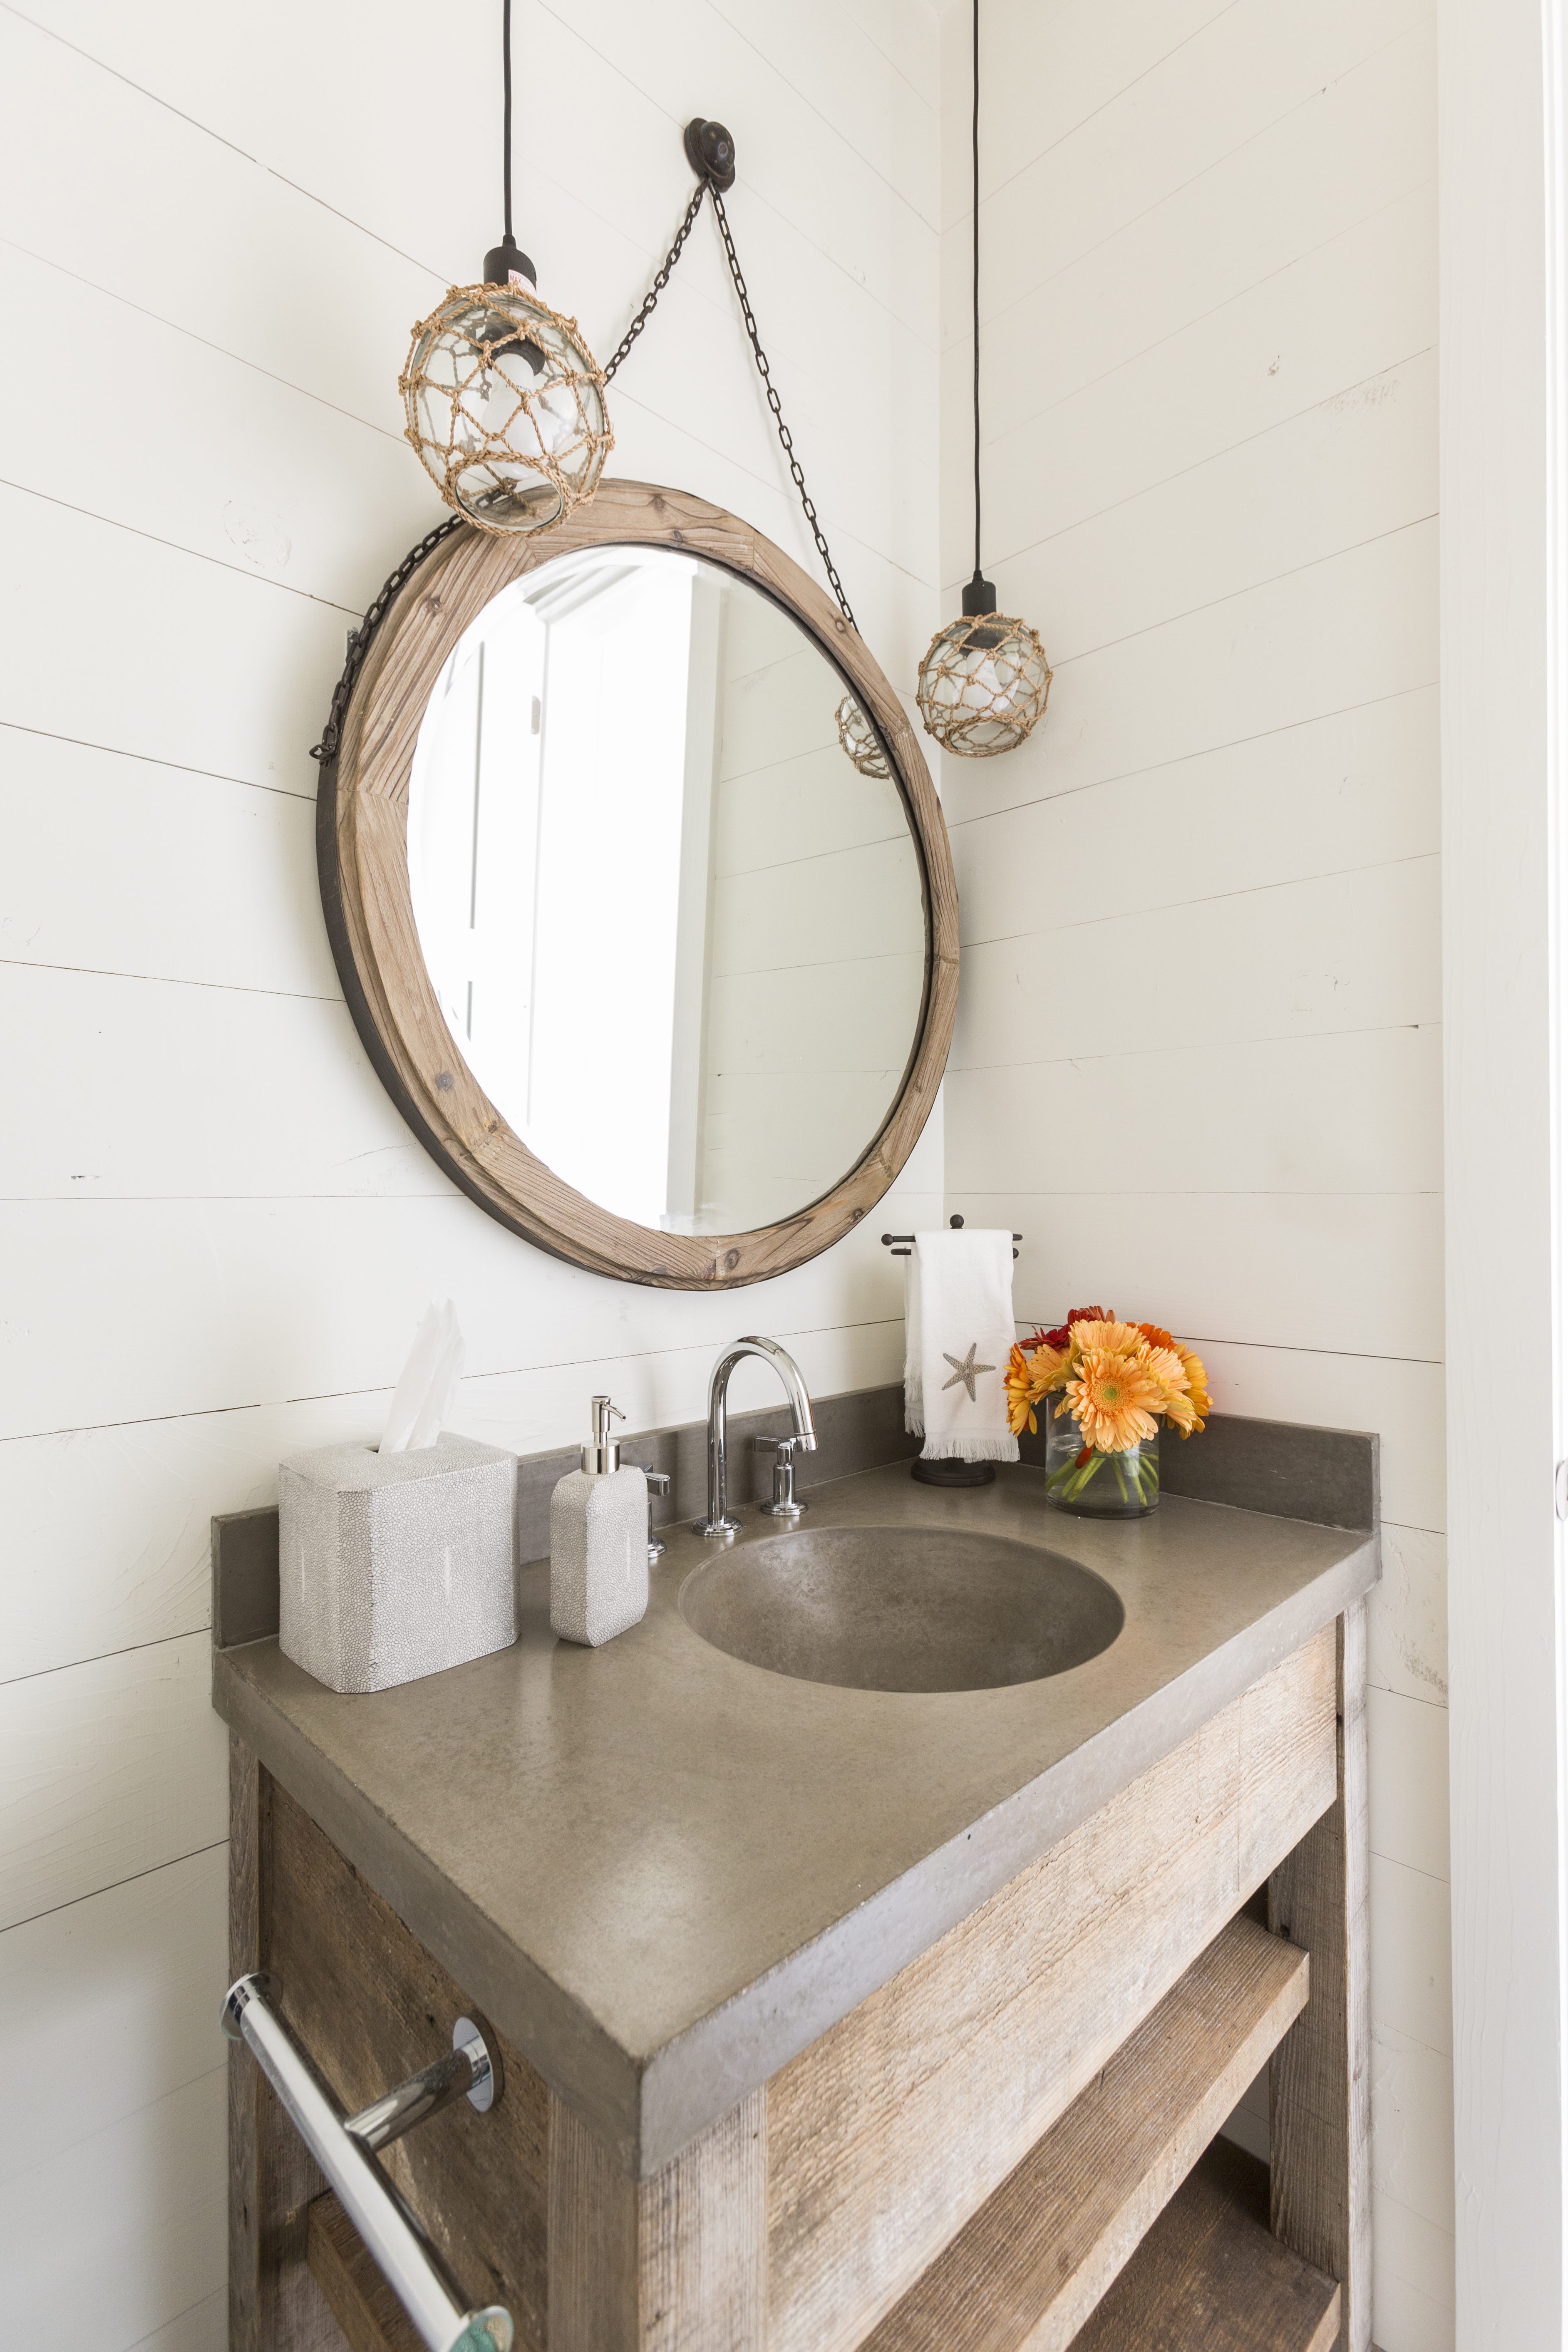 Wooden round hanging mirror placed in a natural bathroom